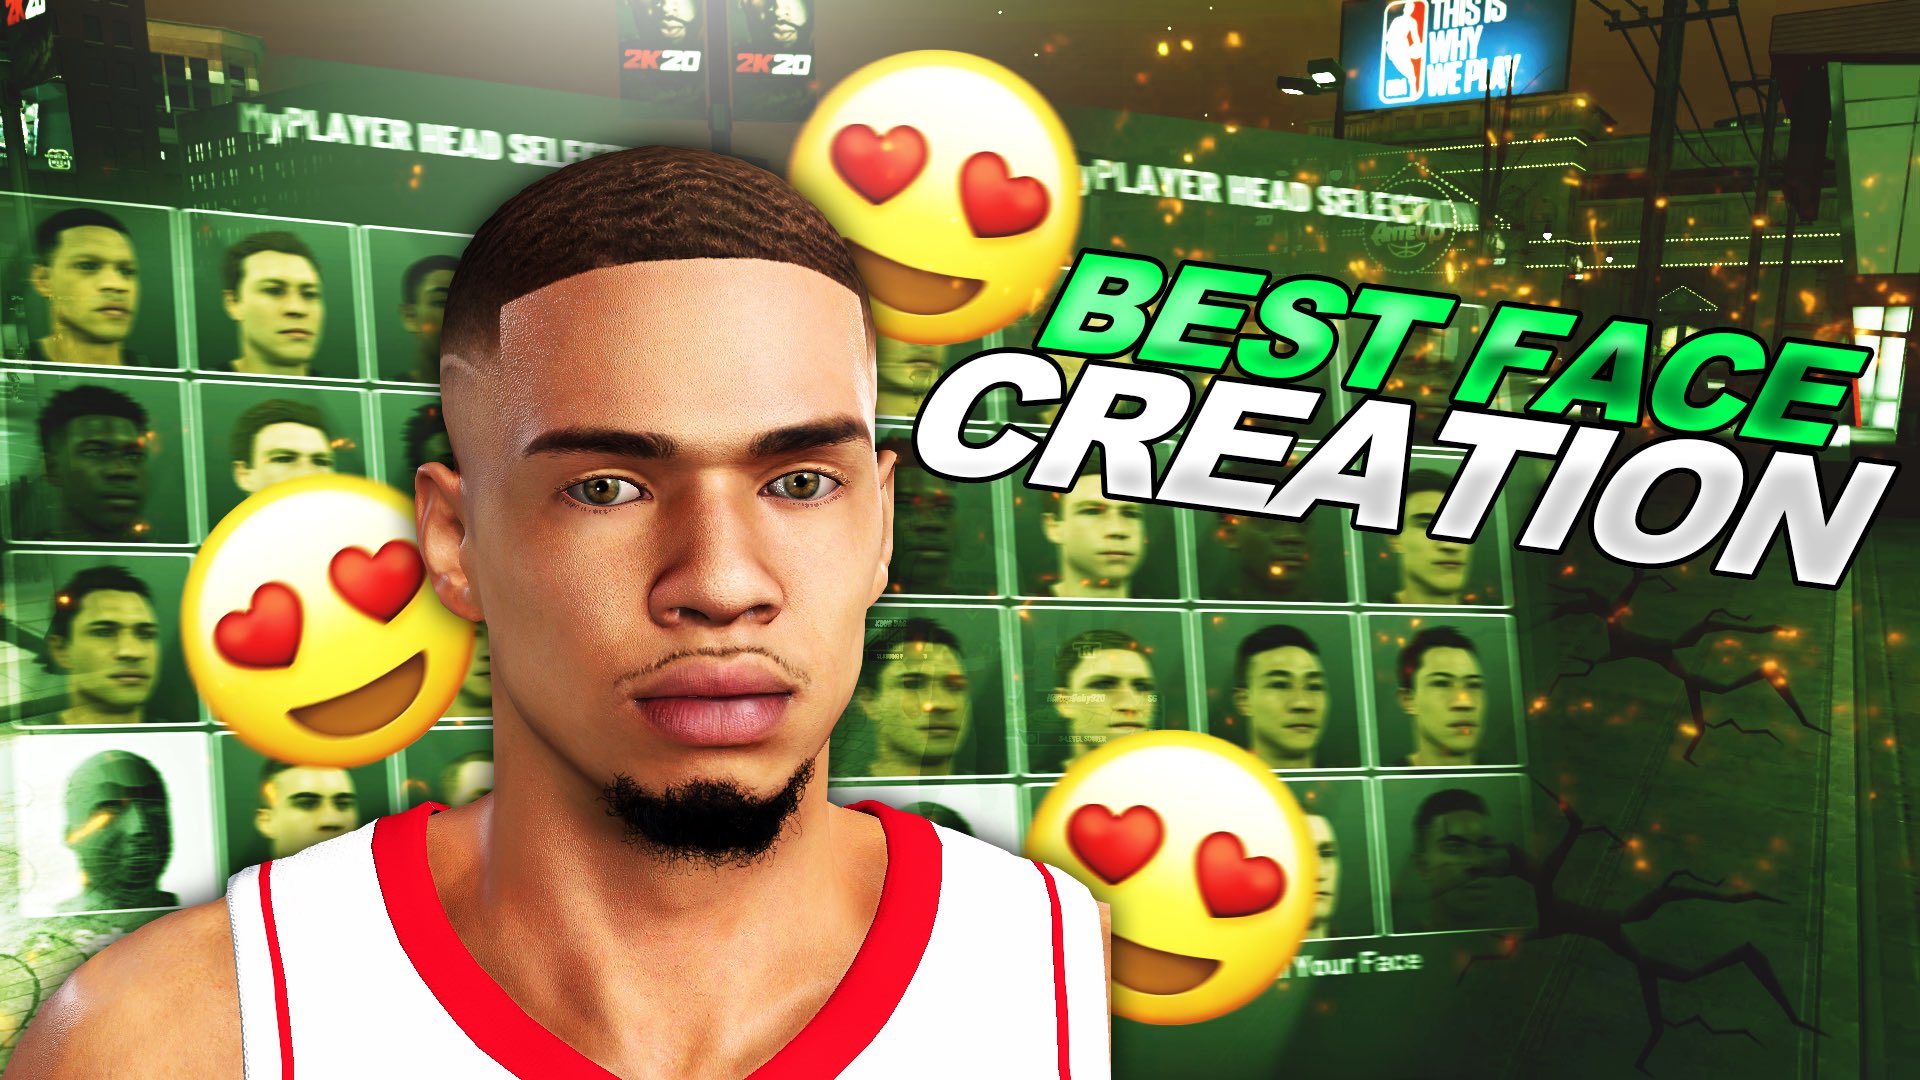 Nba2k22 Badge Grinder On Twitter Drippy Face Creation Nba 2k20 How To Look Like A Cheeser On Nba 2k20 Be Https T Co Zcxwhi1z3g Via Youtube